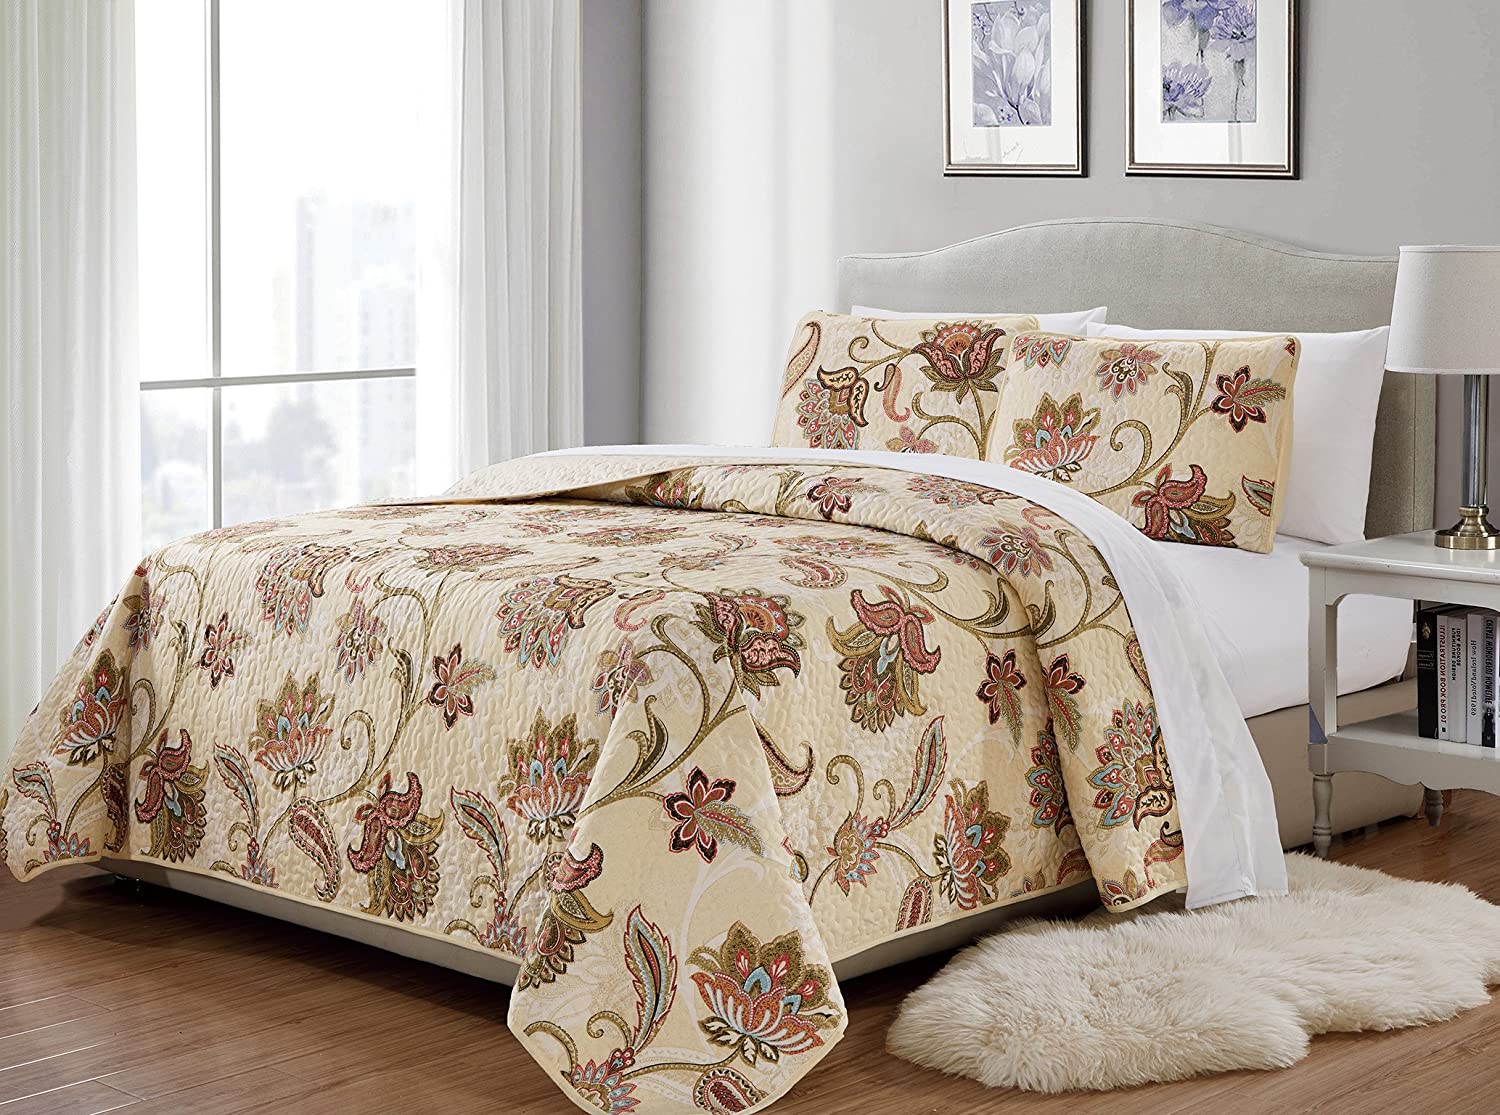 MK Home 3pc King/California King Bedspread Quilted Print Floral Beige ...